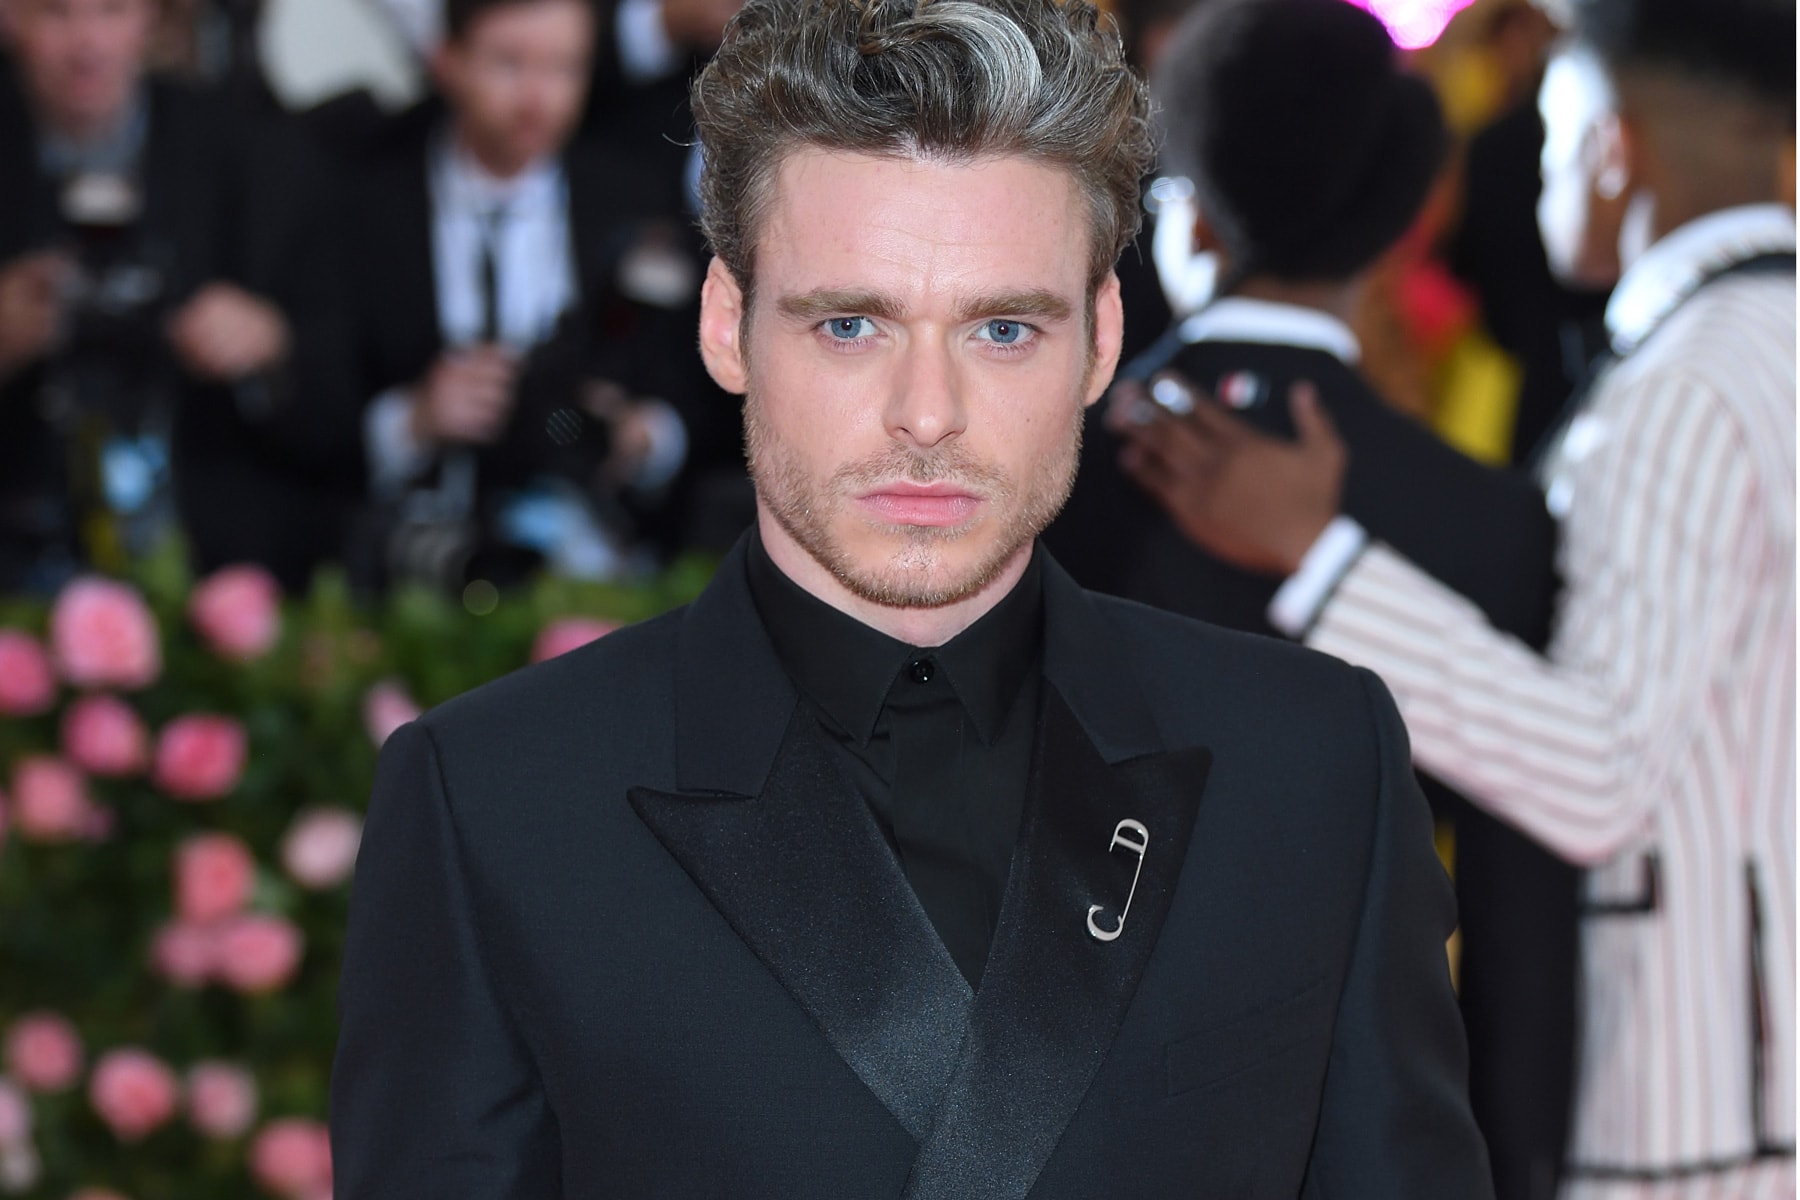 Richard Madden in Talks to Join Marvel's 'The Eternals' bodyguard game of thrones got marvel cinematic universe 